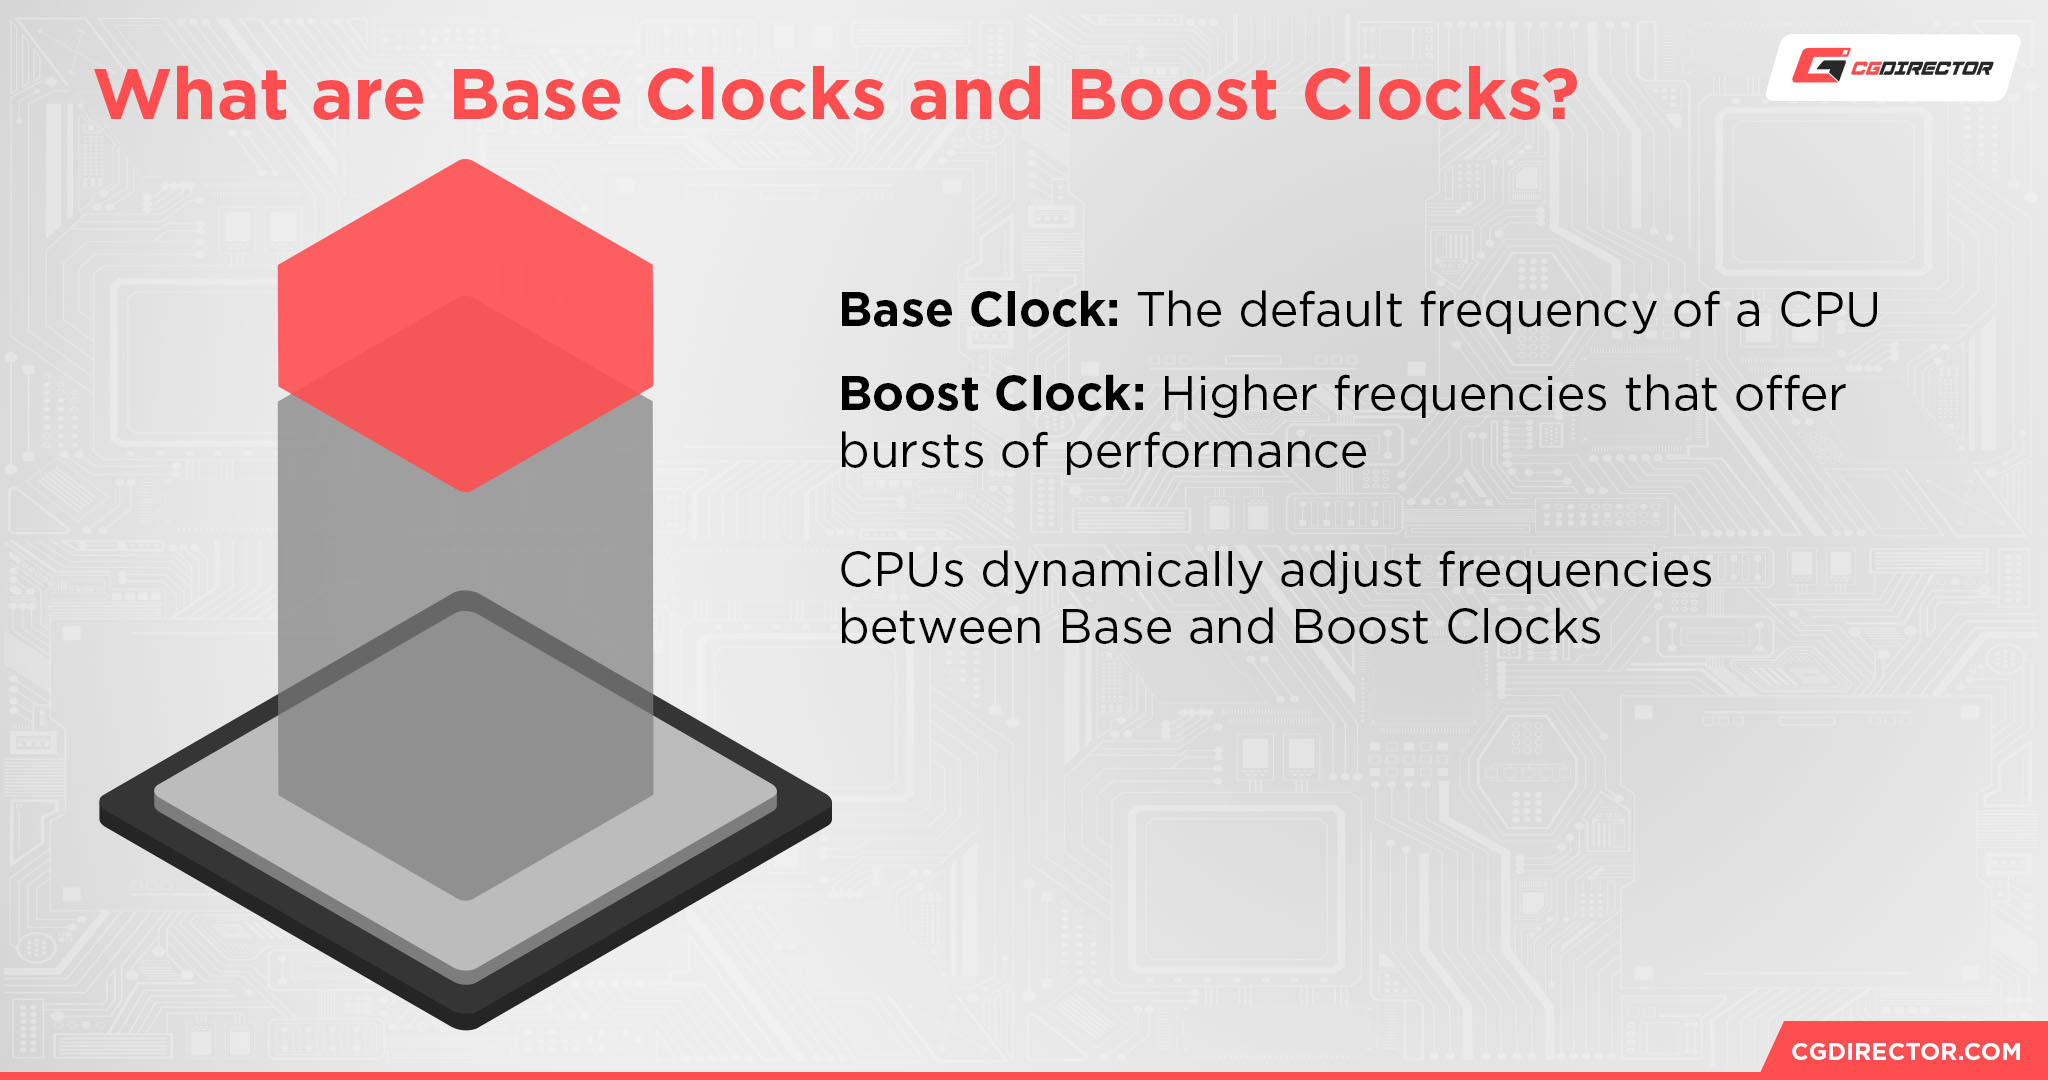 What are Base Clocks and Boost Clocks